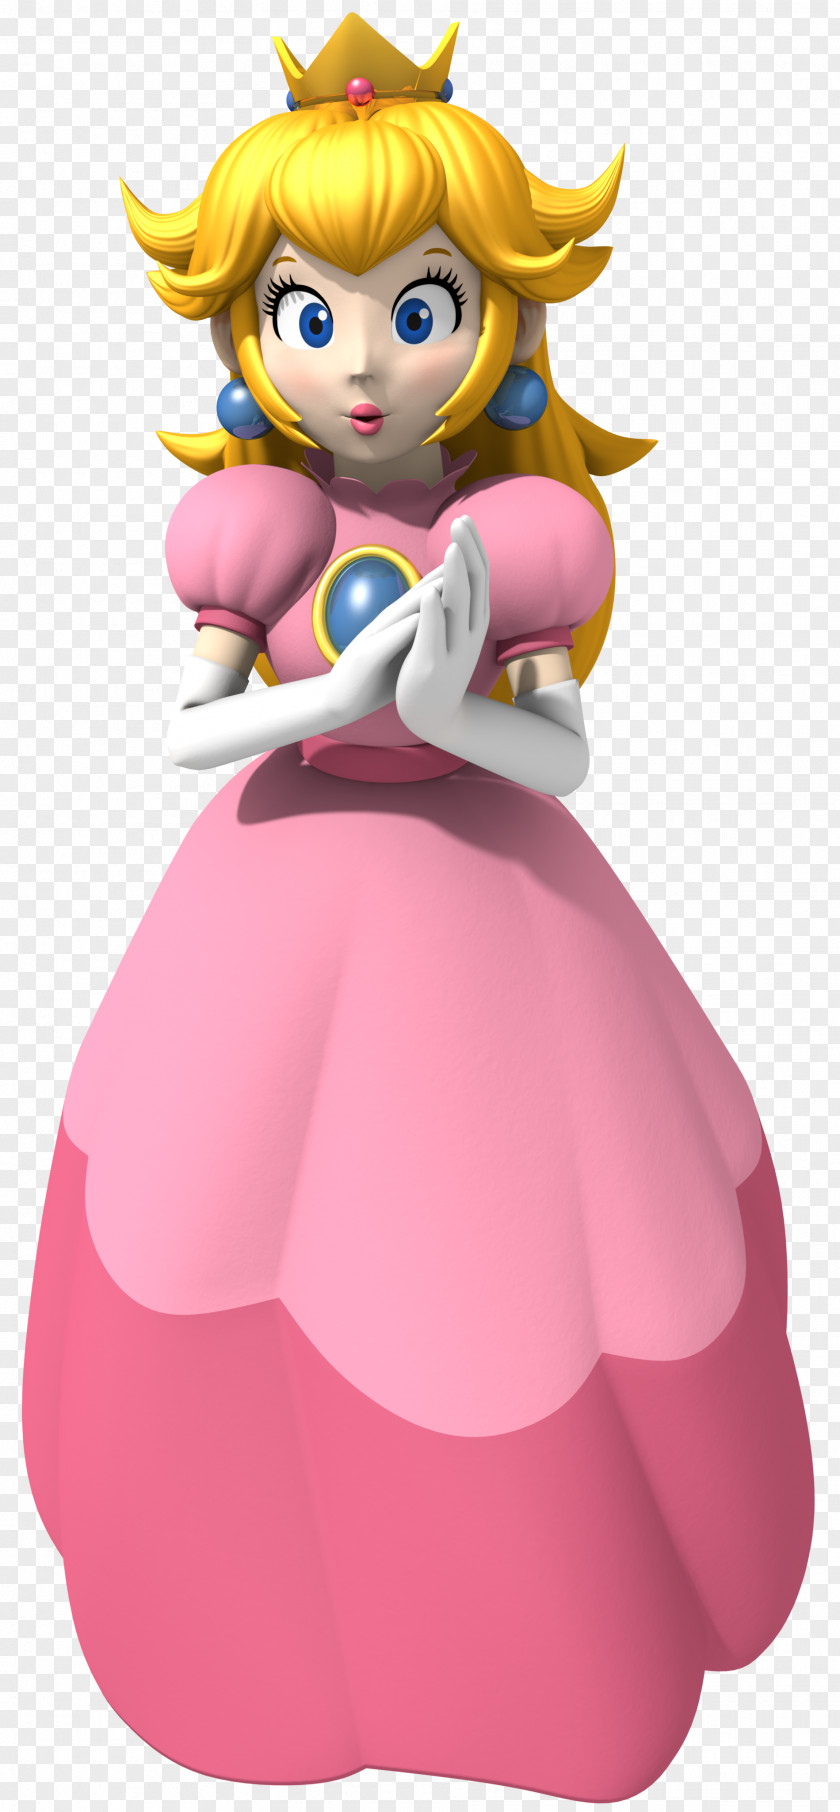 Princess Peach Transparent Background Super Mario Bros. Kart 64 All-Stars Strikers Charged PNG